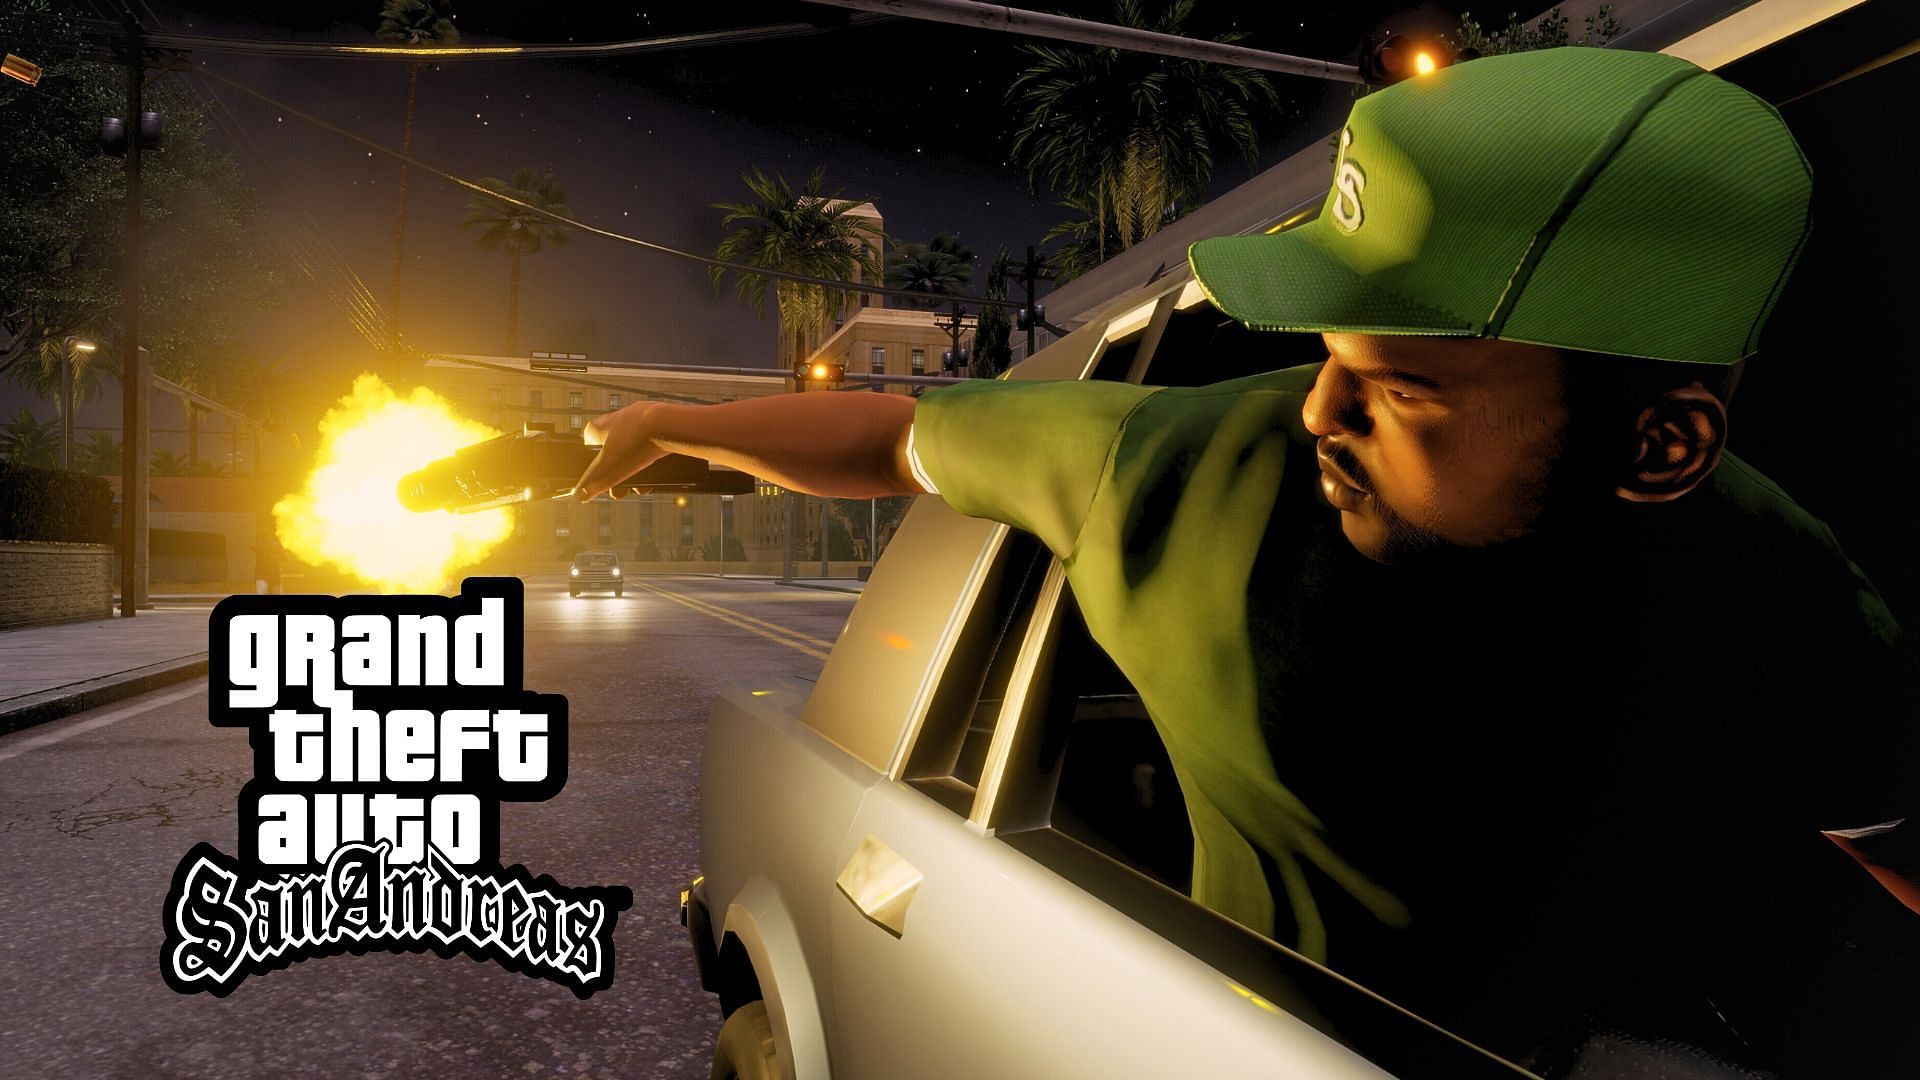 5 fascinating facts about GTA San Andreas worth knowing